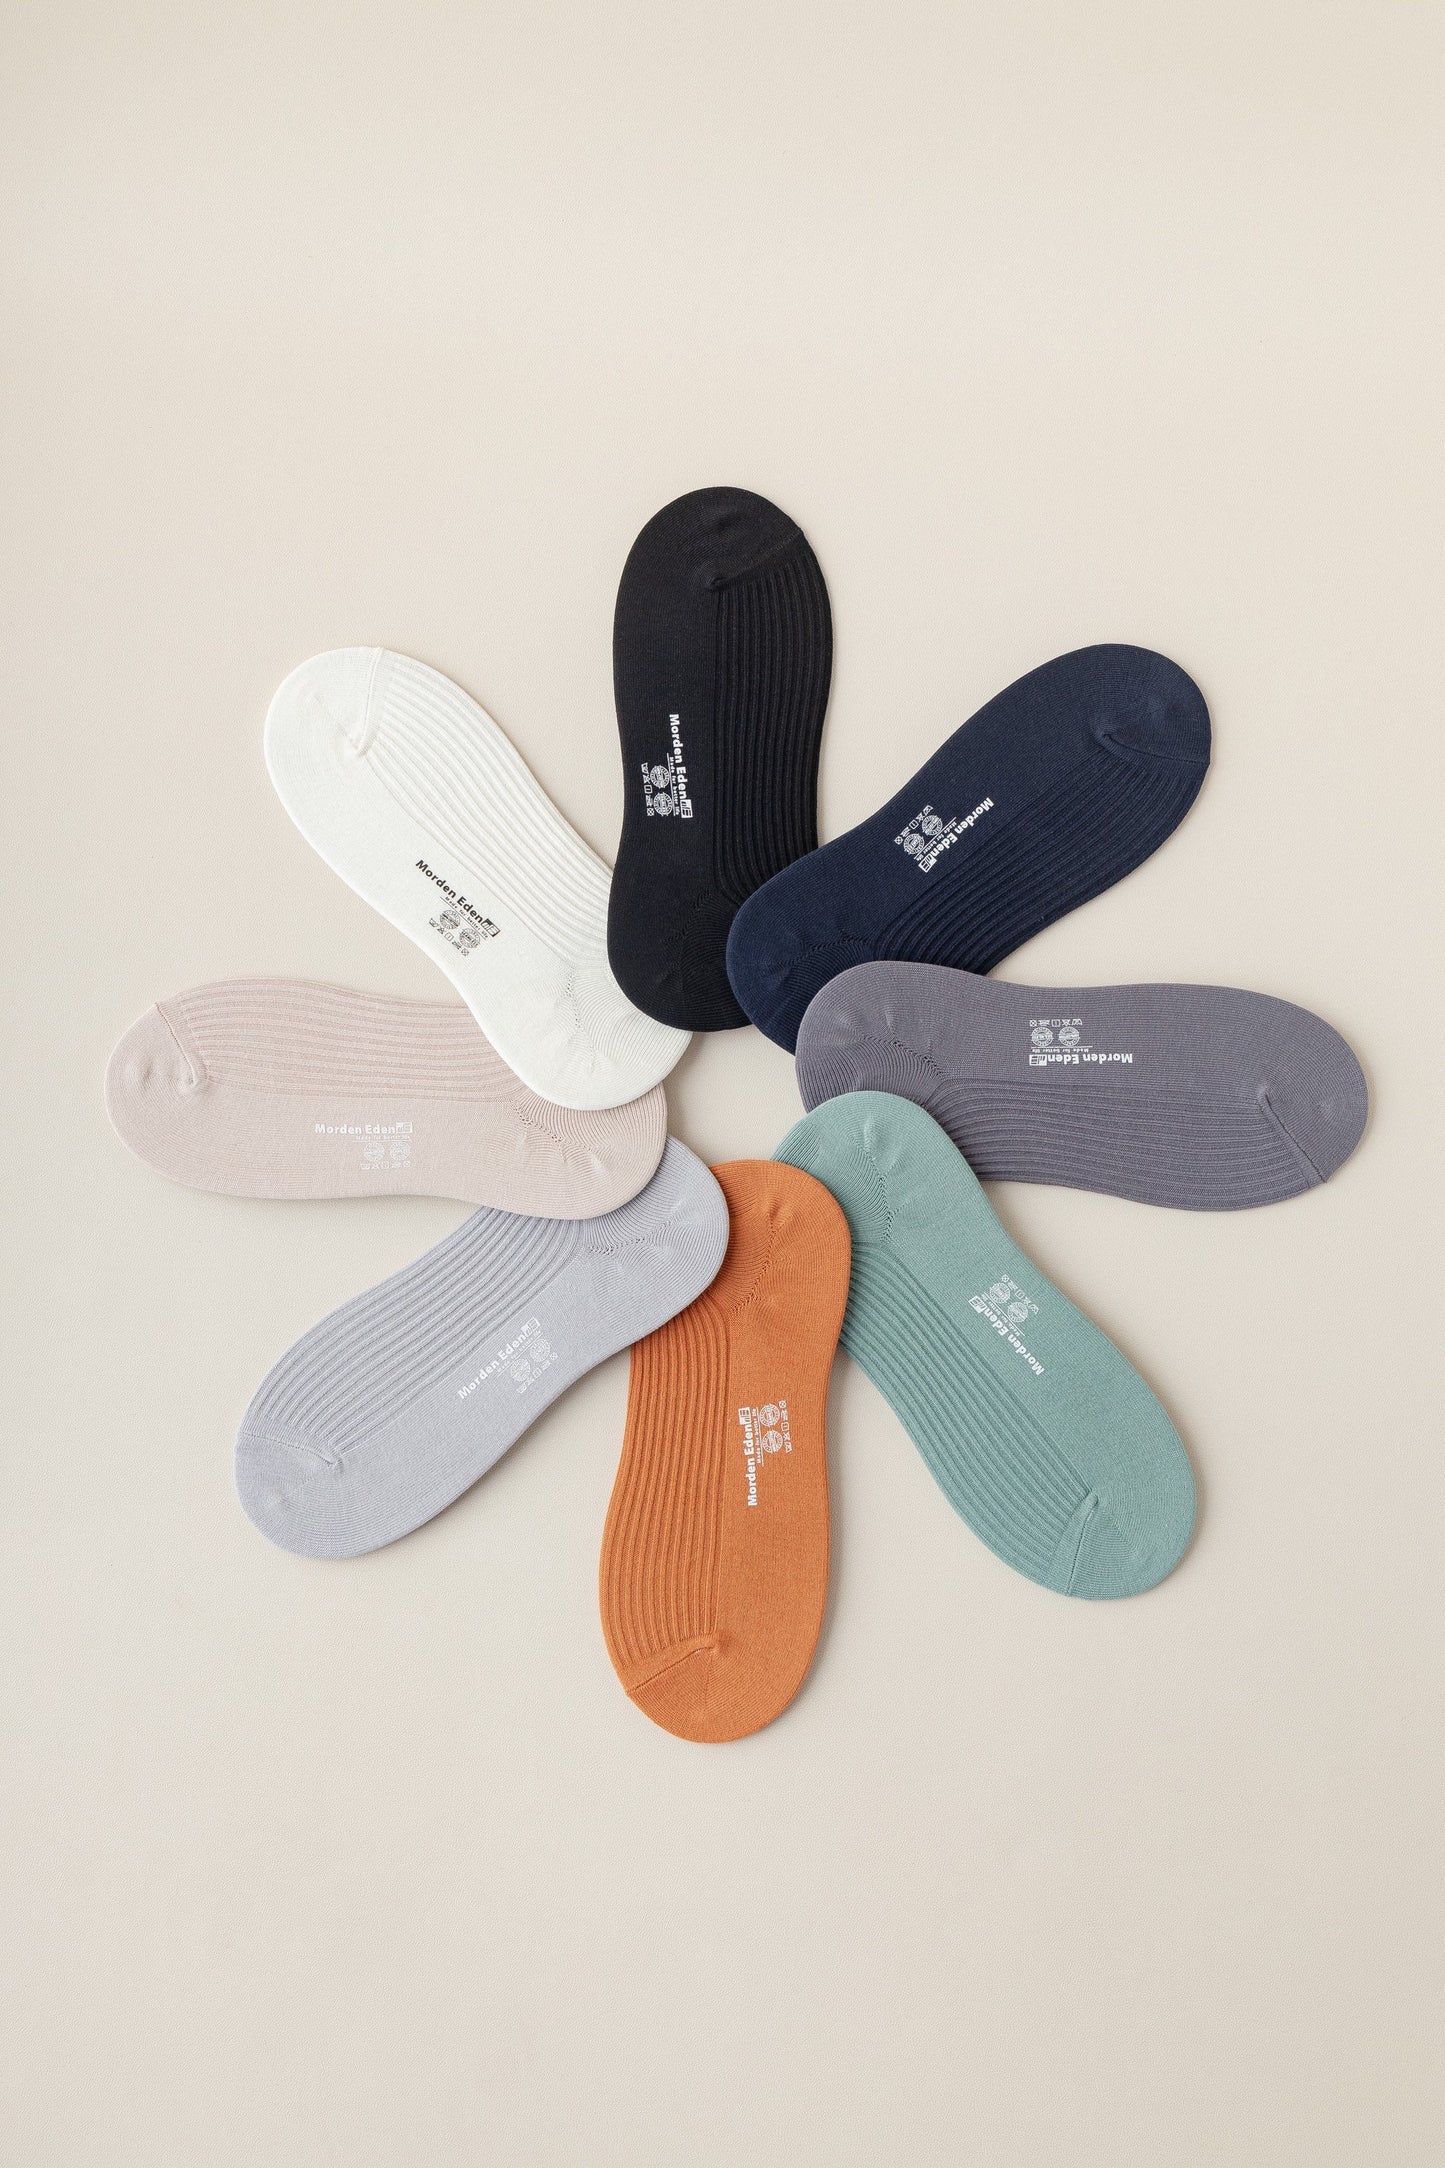 Miss June’s | Men’s | 1 pair Cotton ankle socks | No show | Daily | Natural | Soft  | Solid color | Gift Idea | Casual | Summer